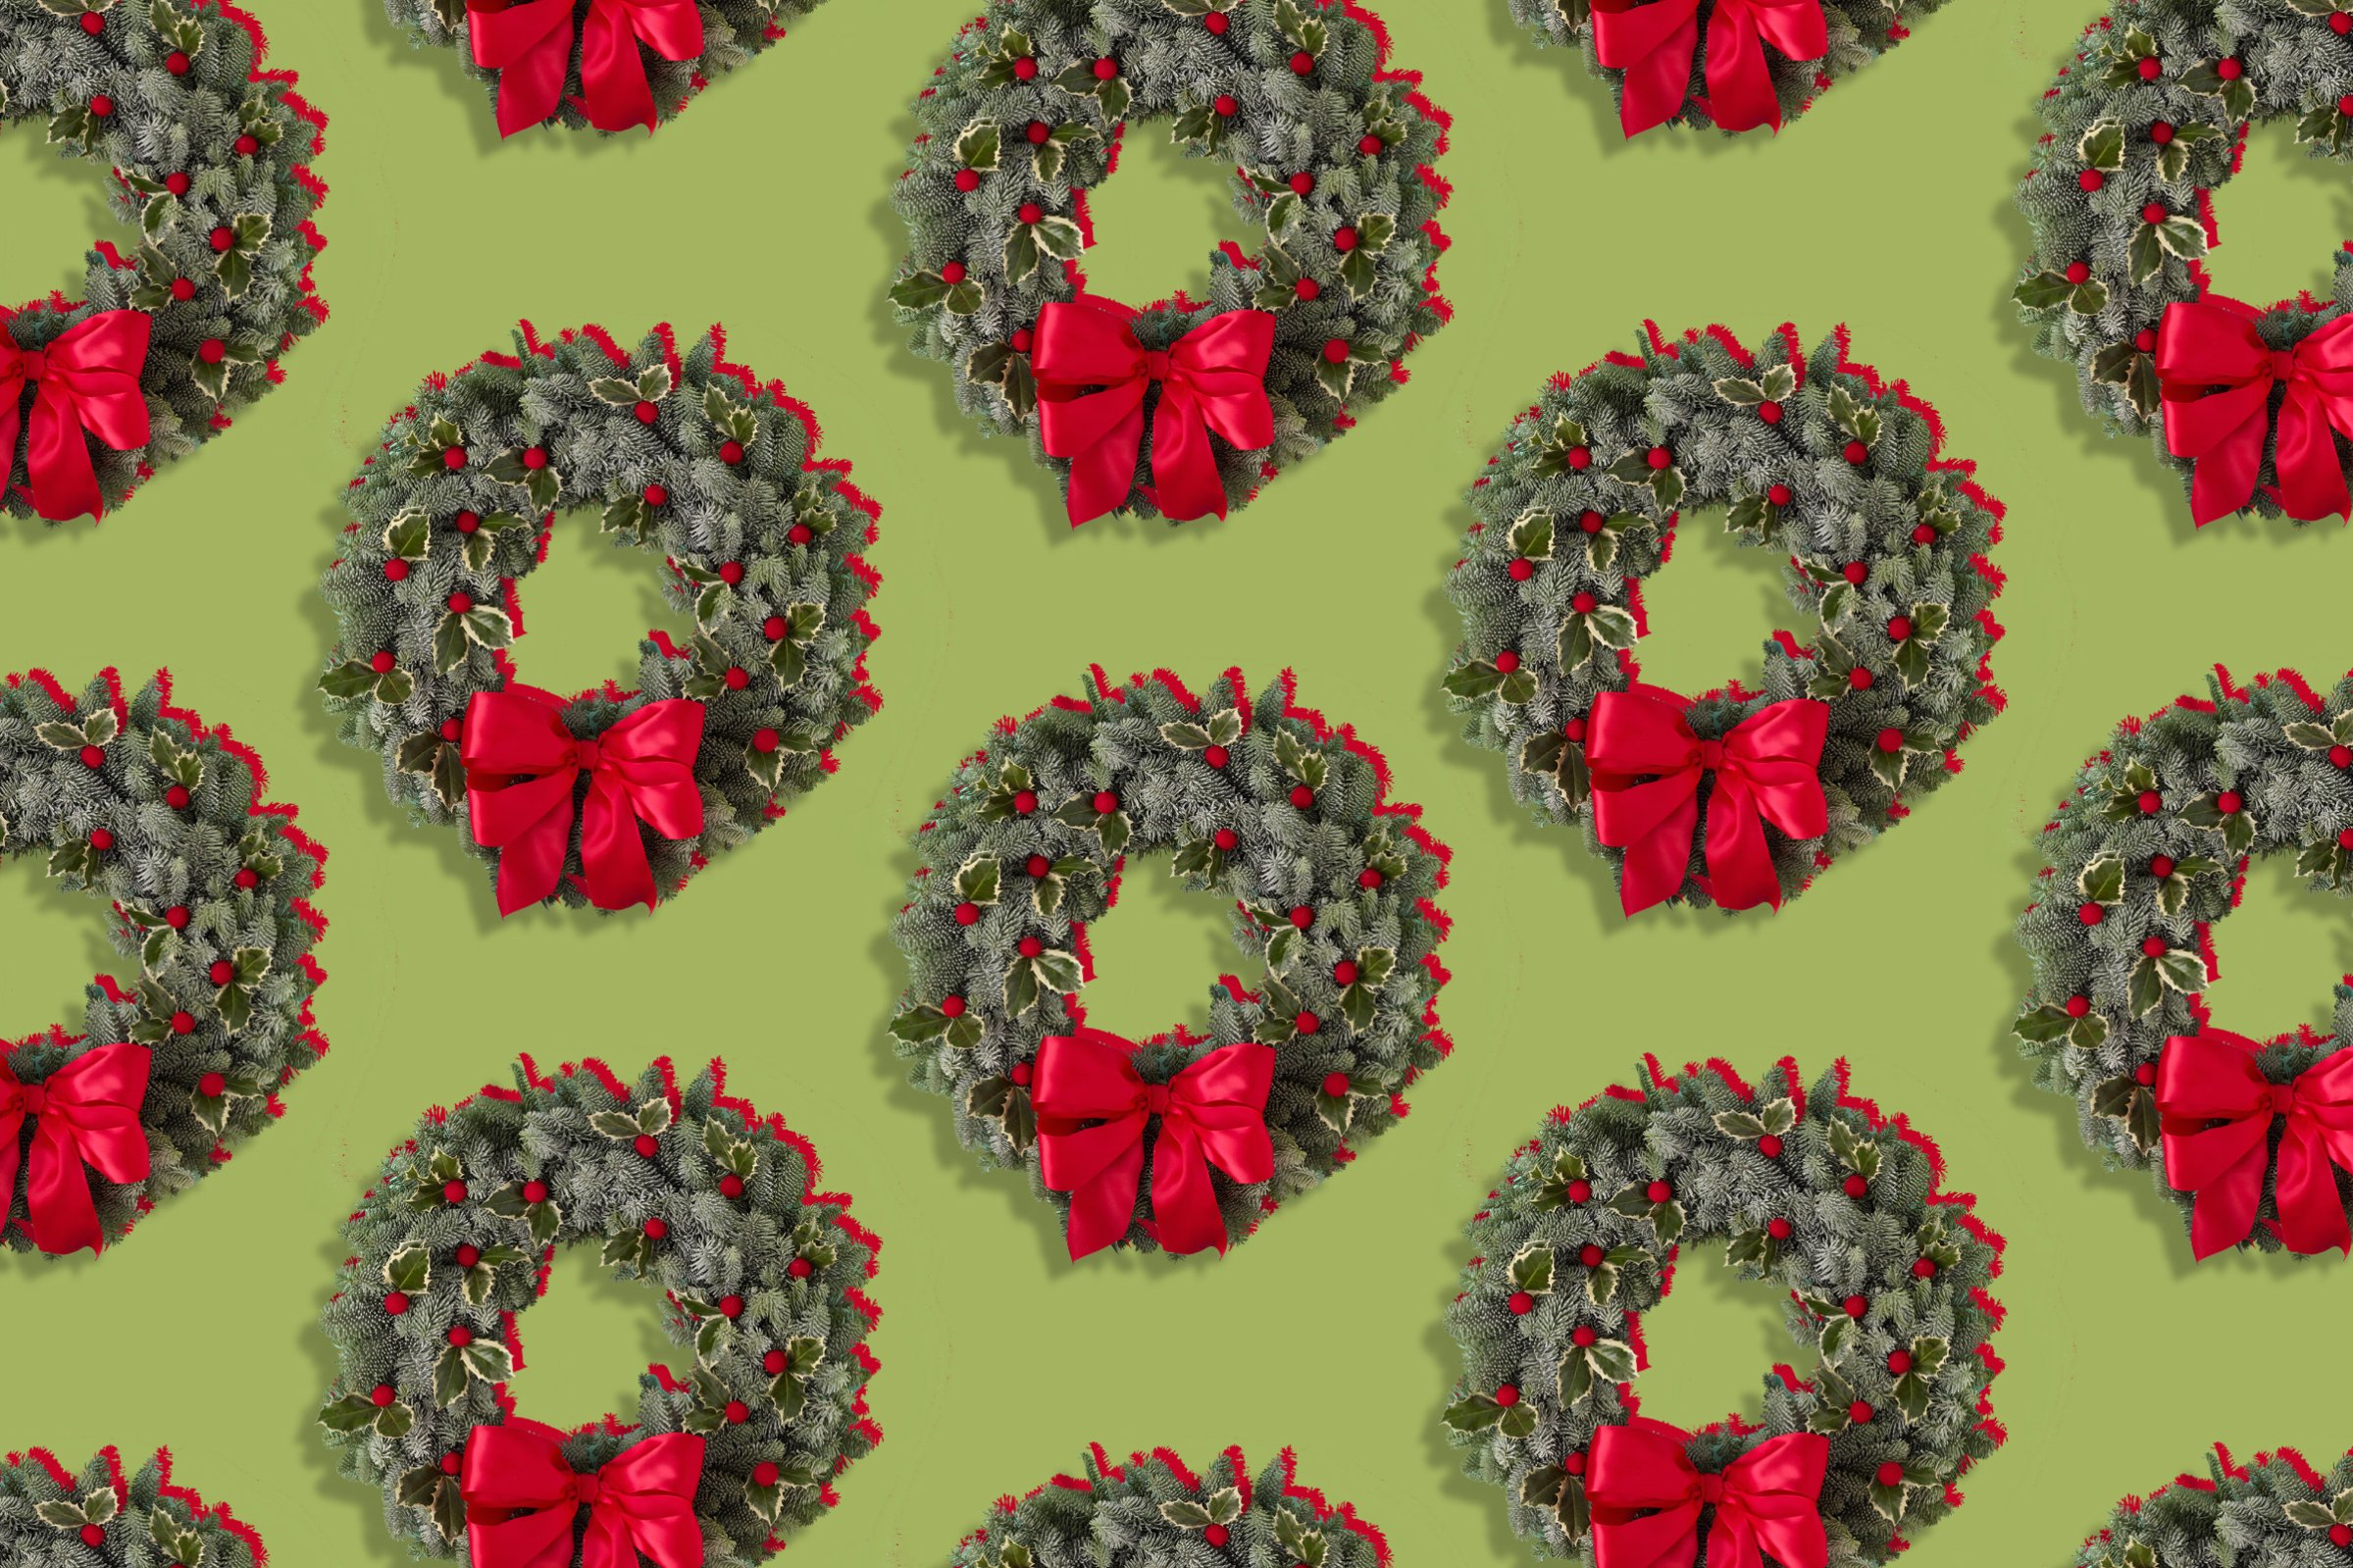 Holiday wreaths